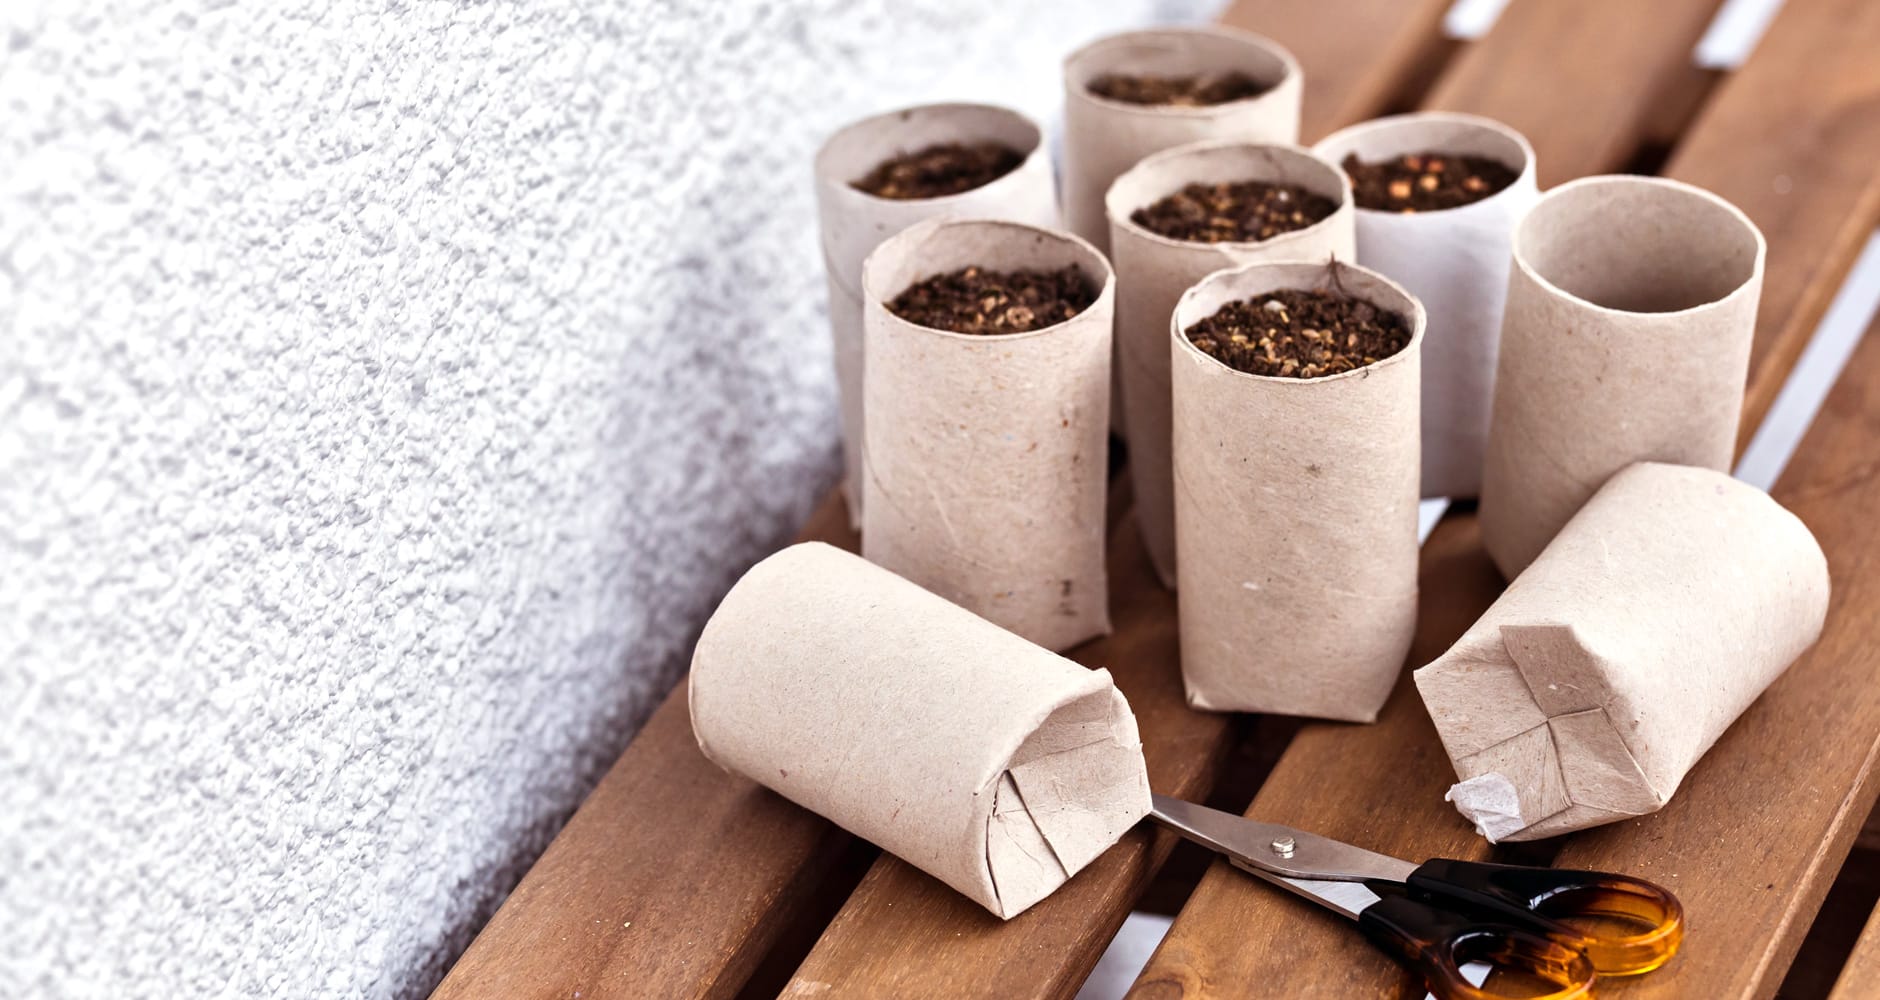 7 Genius Ways To Recycle Toilet Paper Tubes - Farmers' Almanac - Plan Your  Day. Grow Your Life.